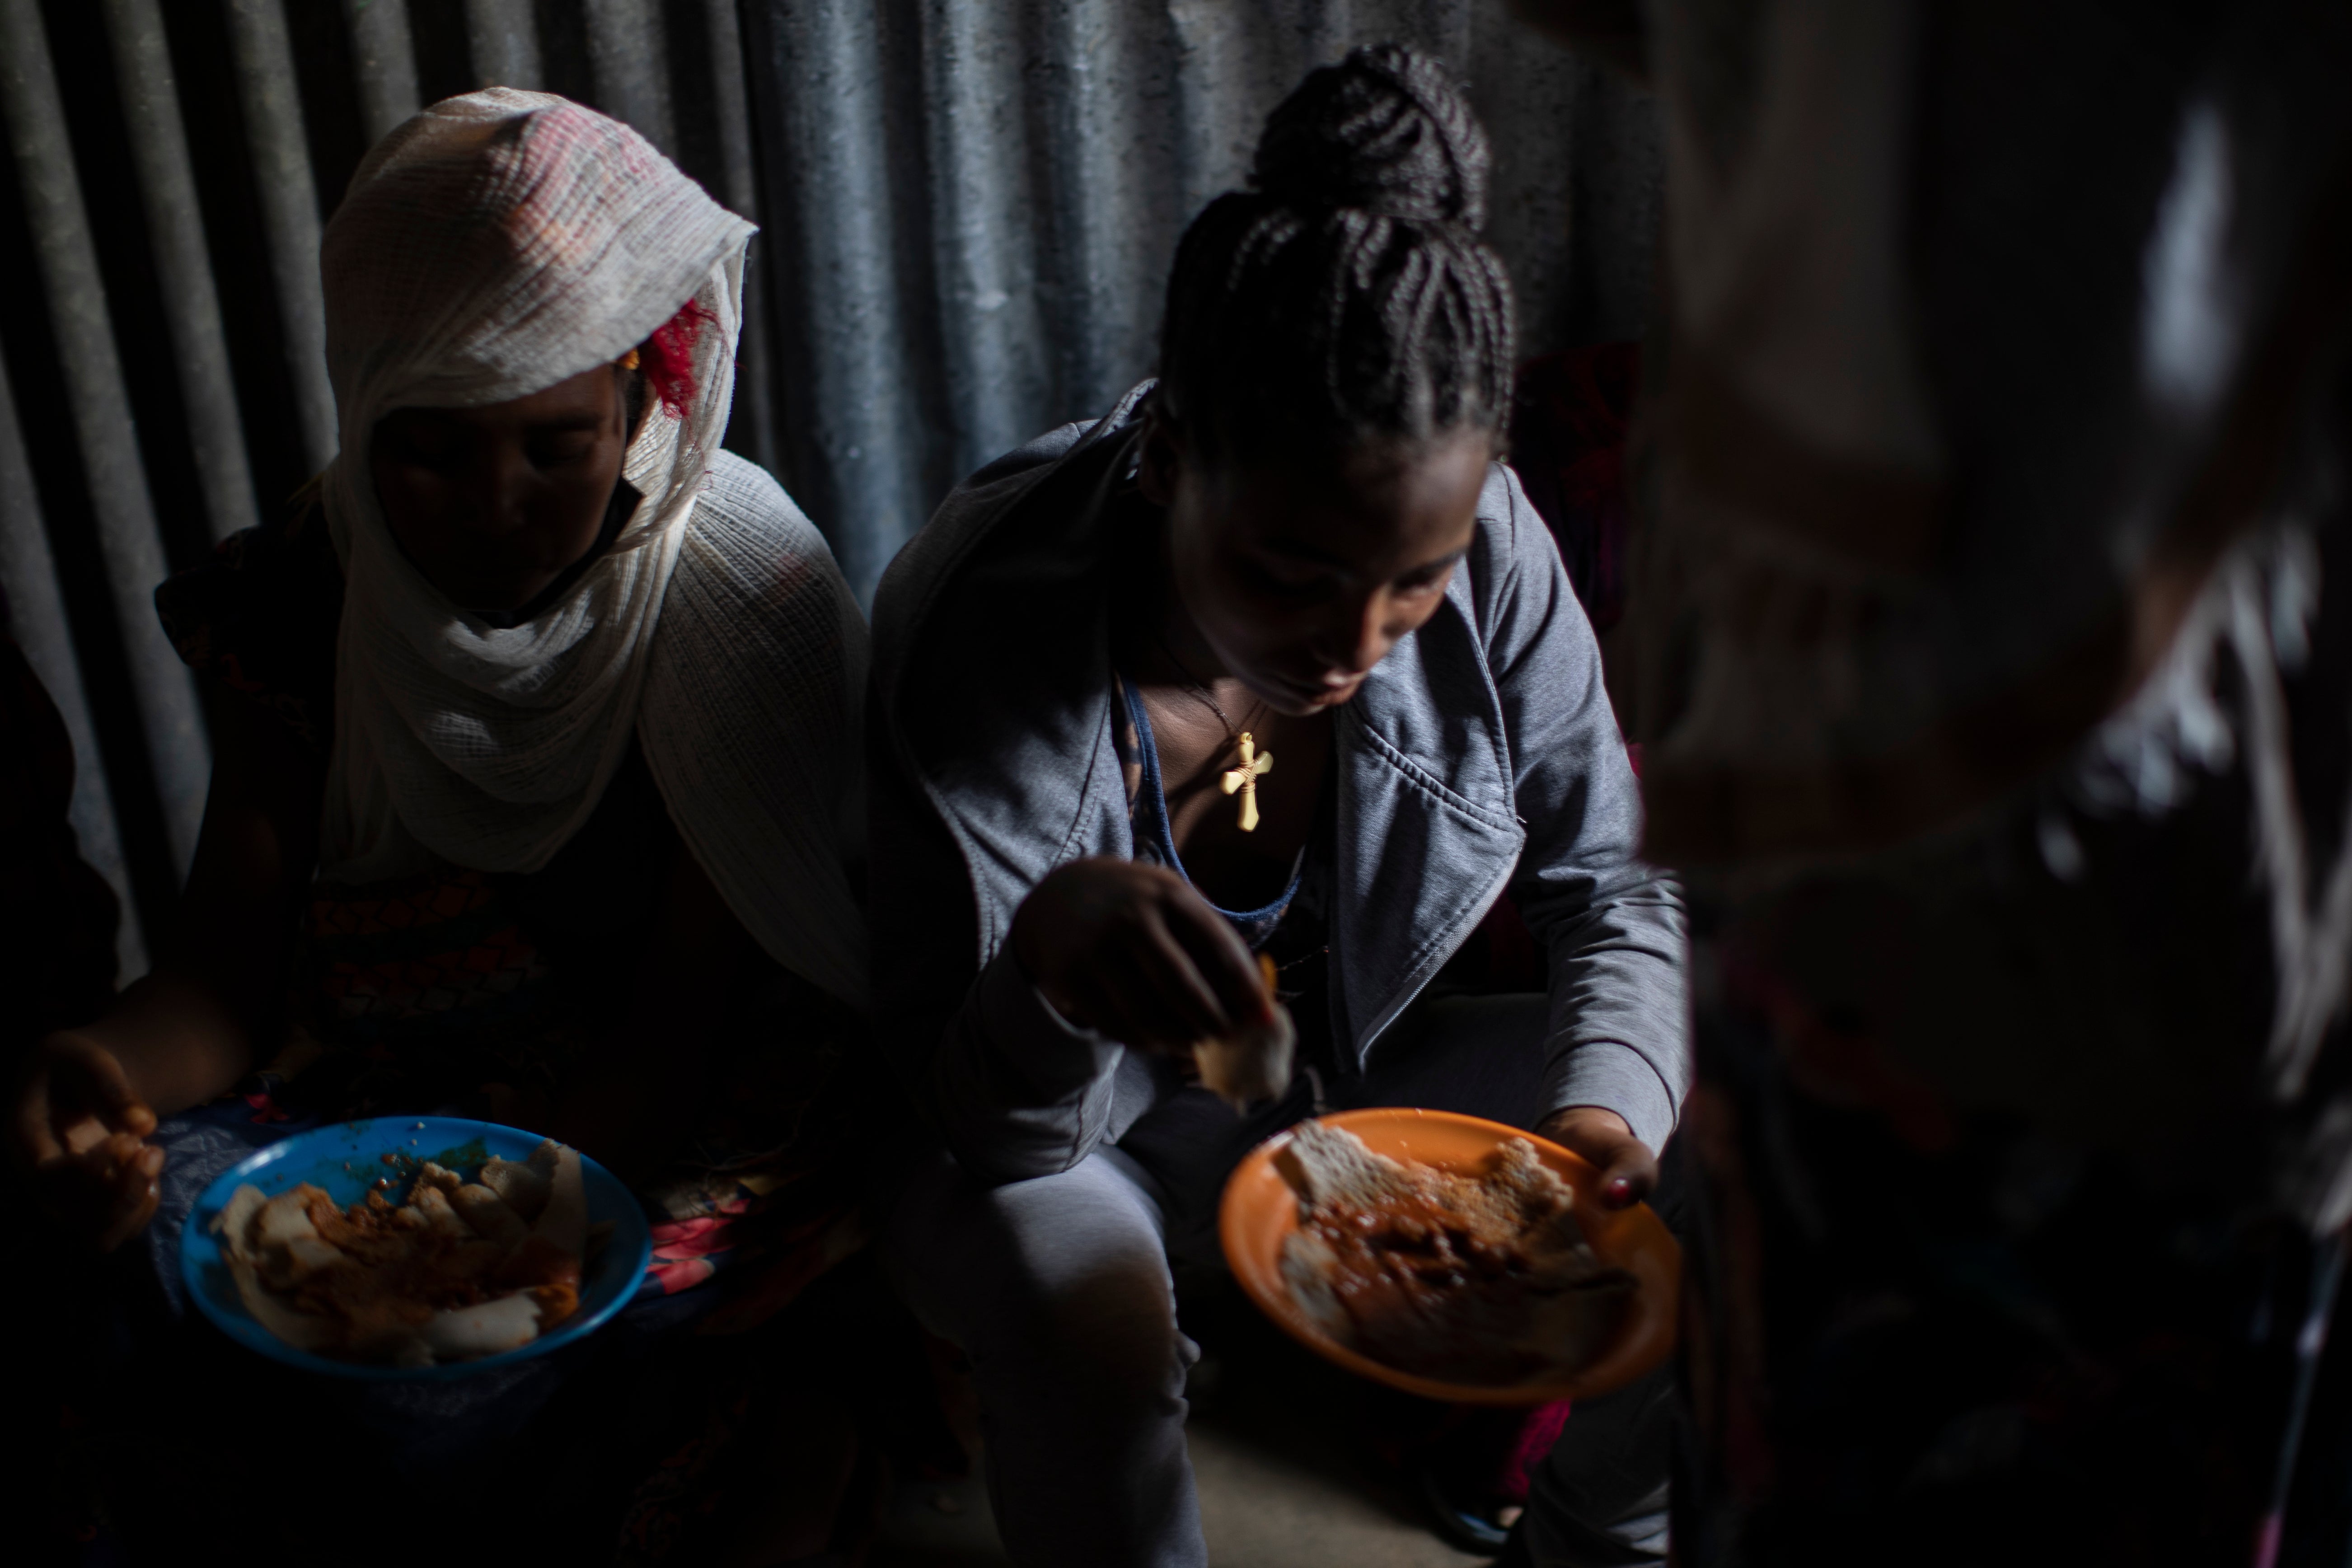 File photo: Displaced Tigrayan women eat in the Tigray region of northern Ethiopia, on 9 May 2021